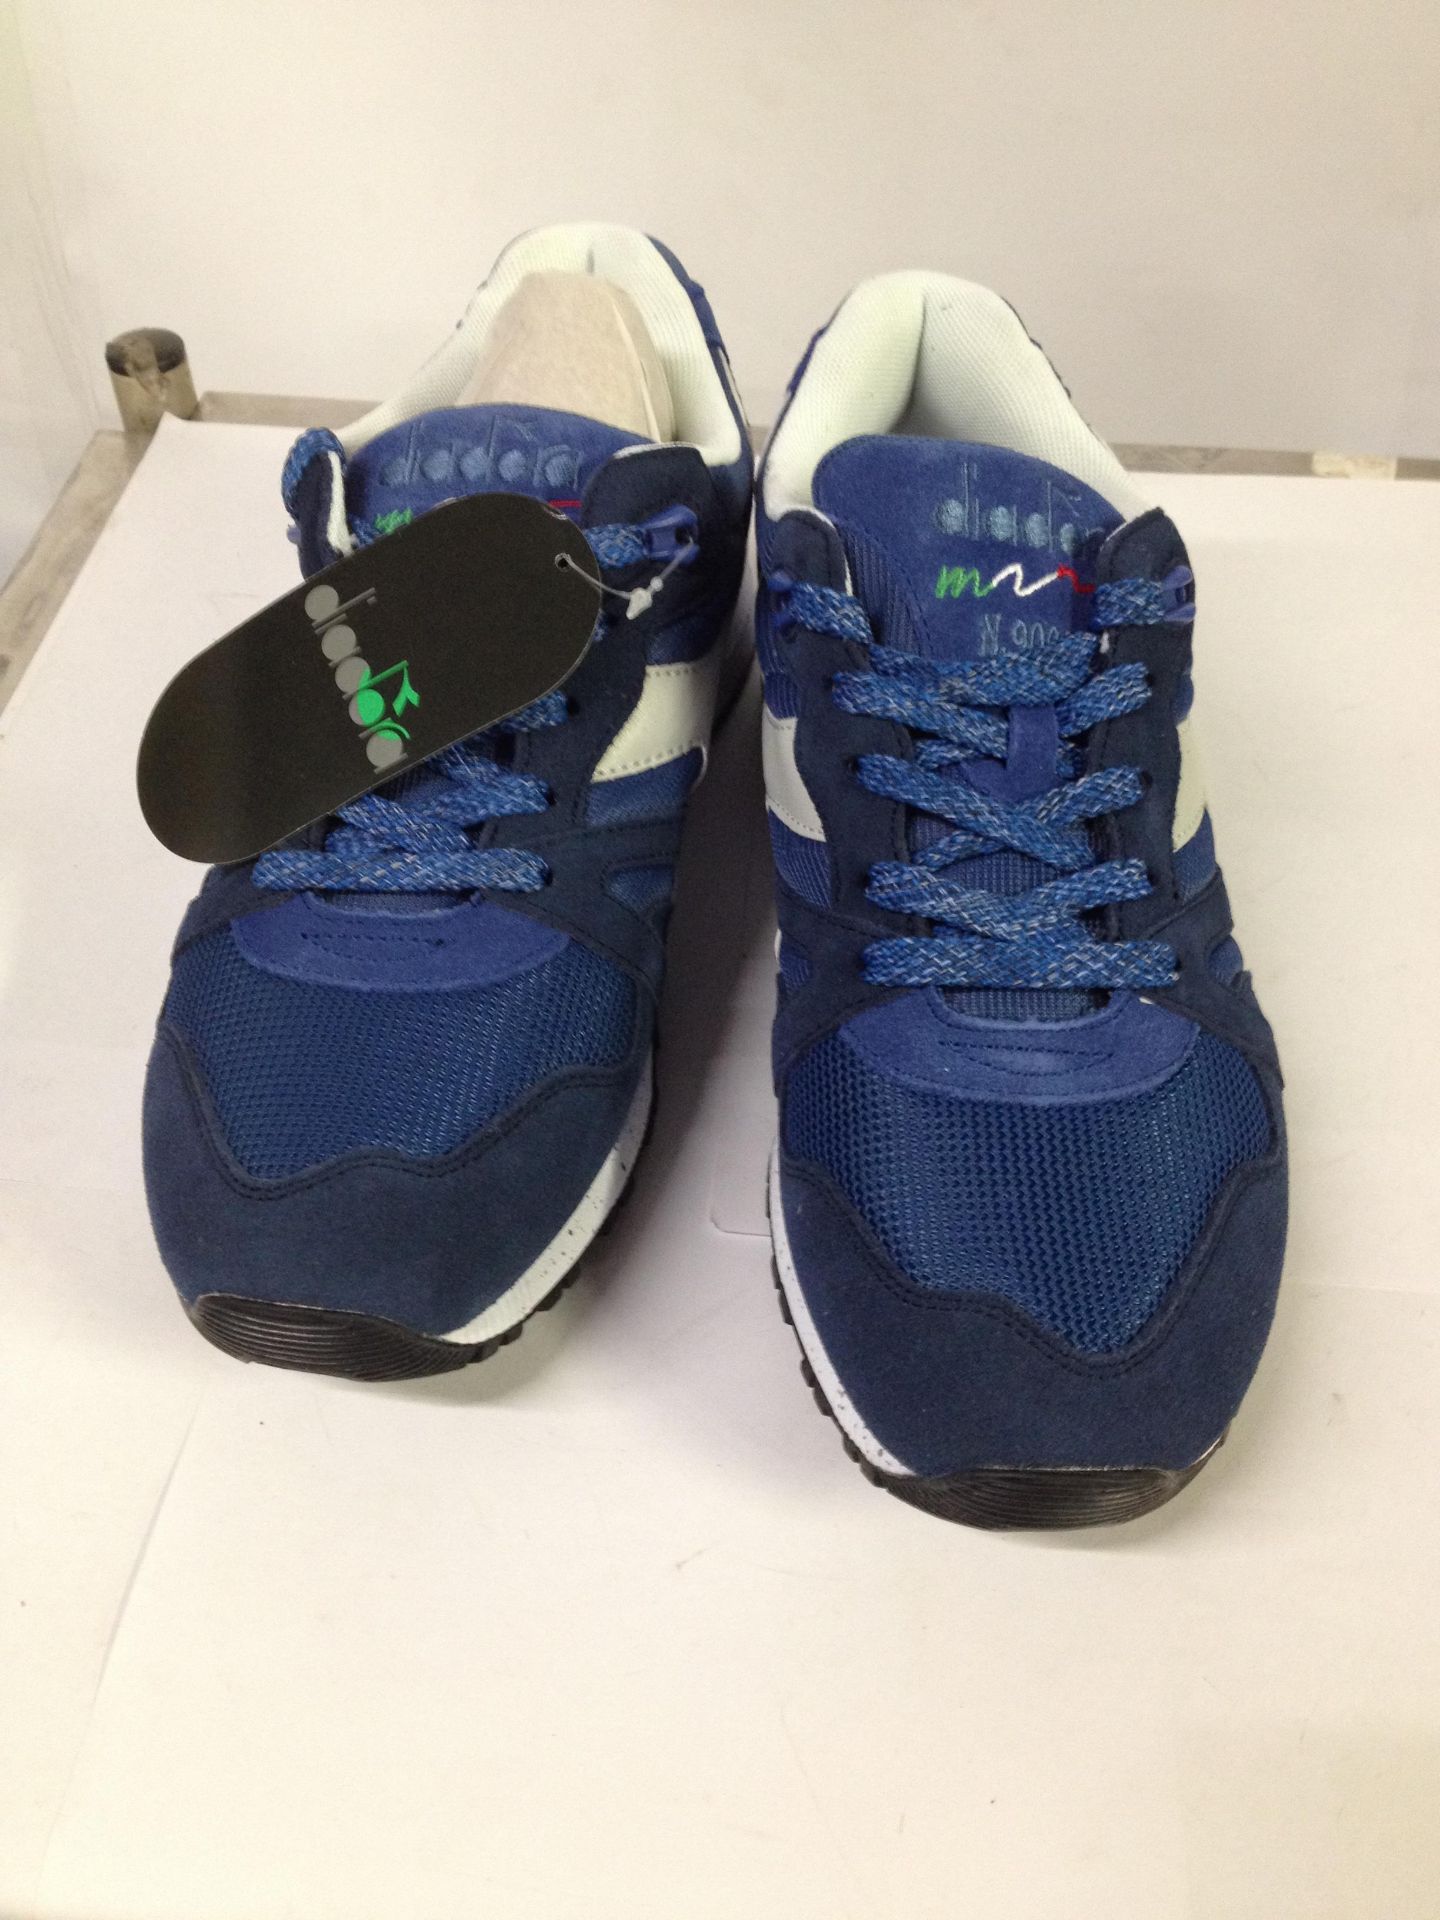 1 x Diadora Trainers | N9000 | Colour: Navy/Blue | UK Size: 9 | RRP £ 95 - Image 2 of 2